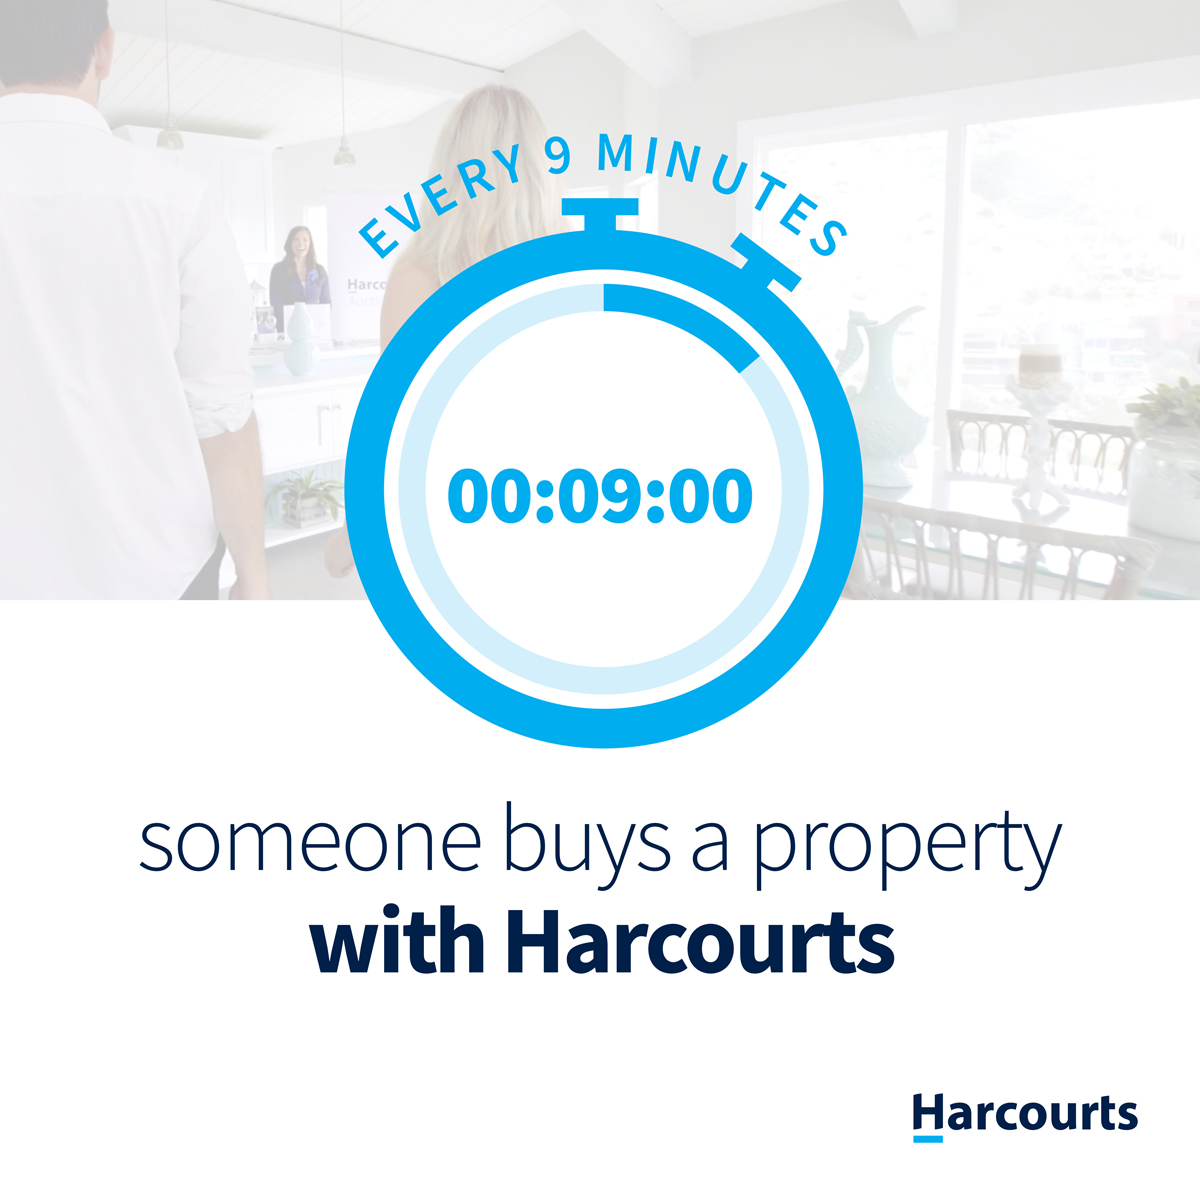 Every 9 minutes someone buys a property with Harcourts.